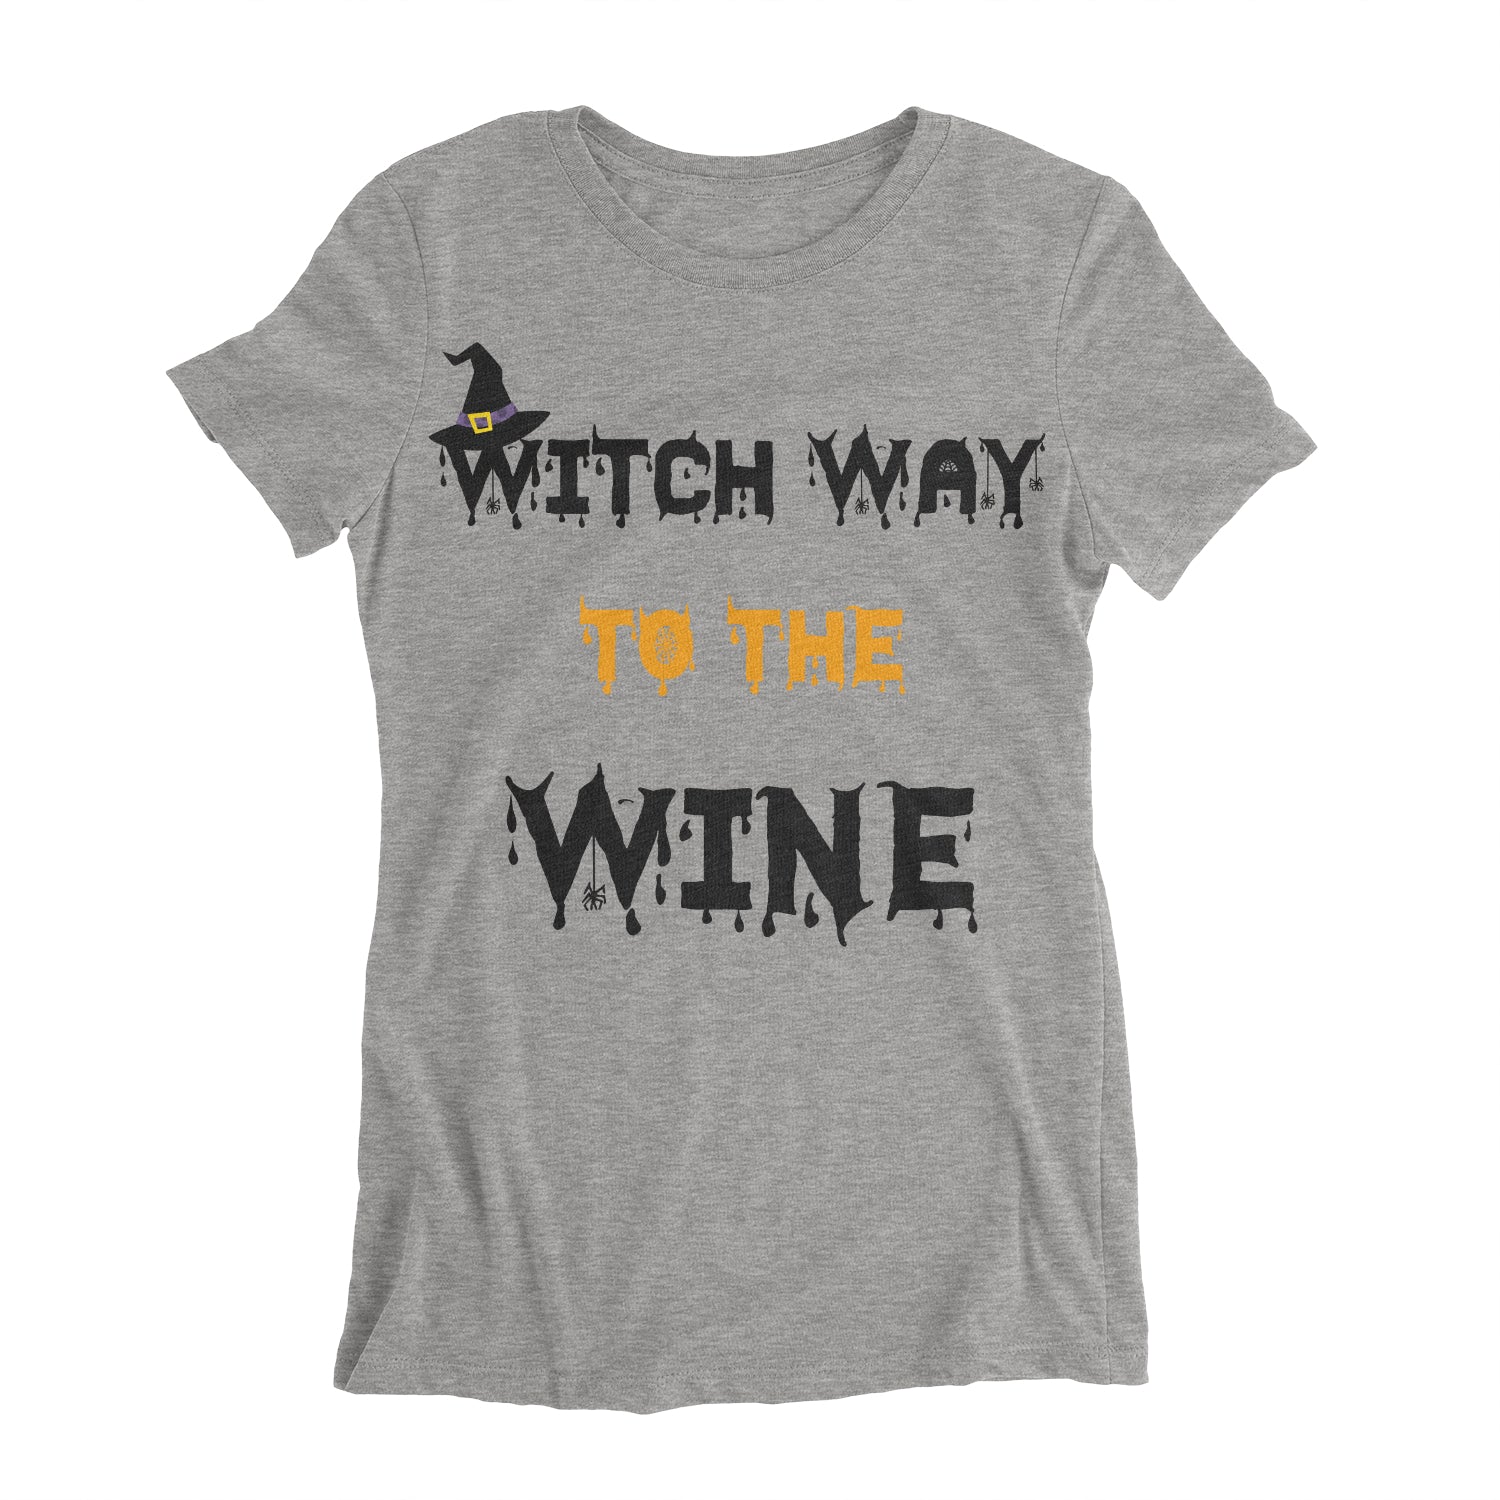 Witch Way to the WINE Shirt